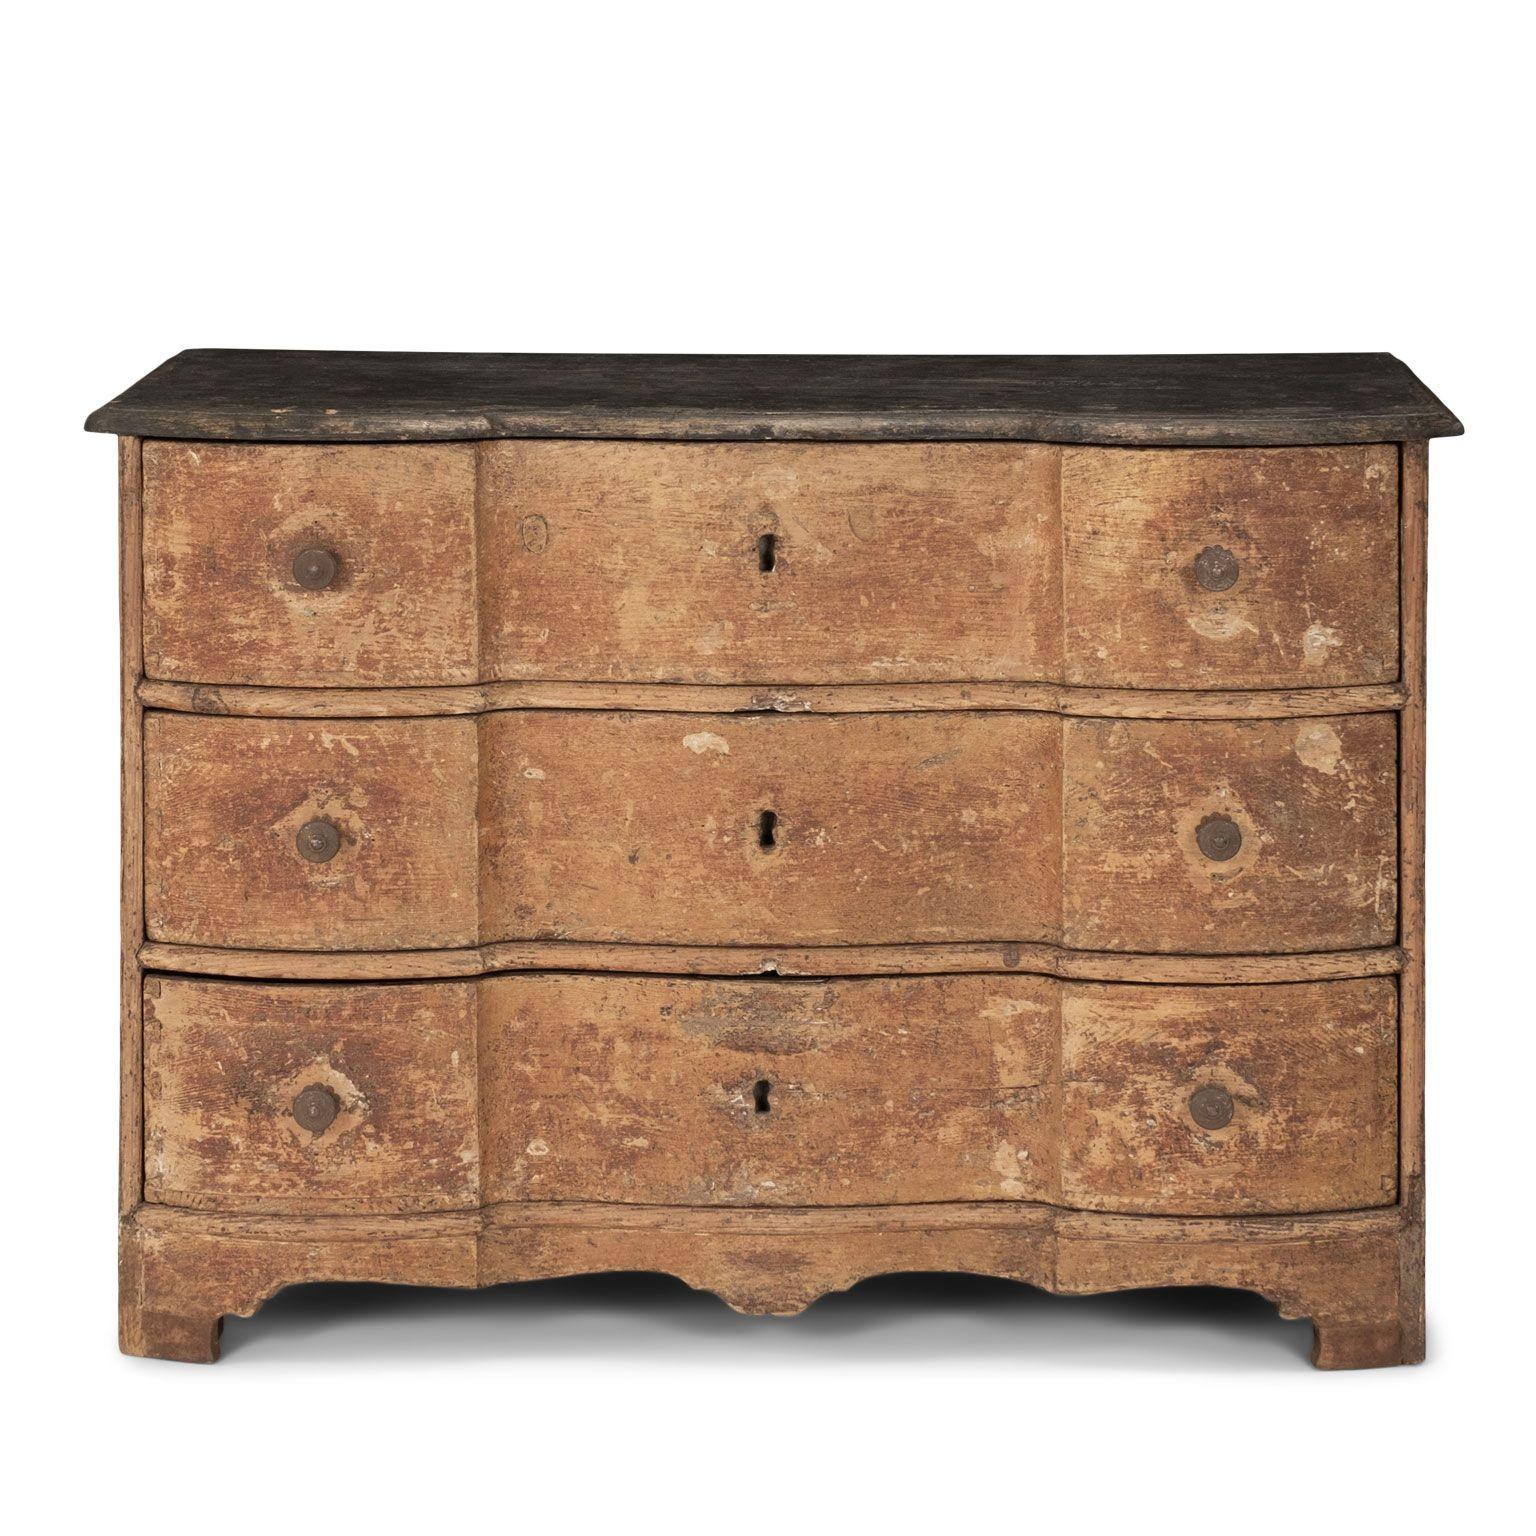 18th century painted serpentine-blocked front commode in remnants of early or original finish. Three wide hand-carved serpentine-blocked front drawers. Rounded turned wooden knob-pulls. Refreshed painted finish adorns top of commode. Shaped lower